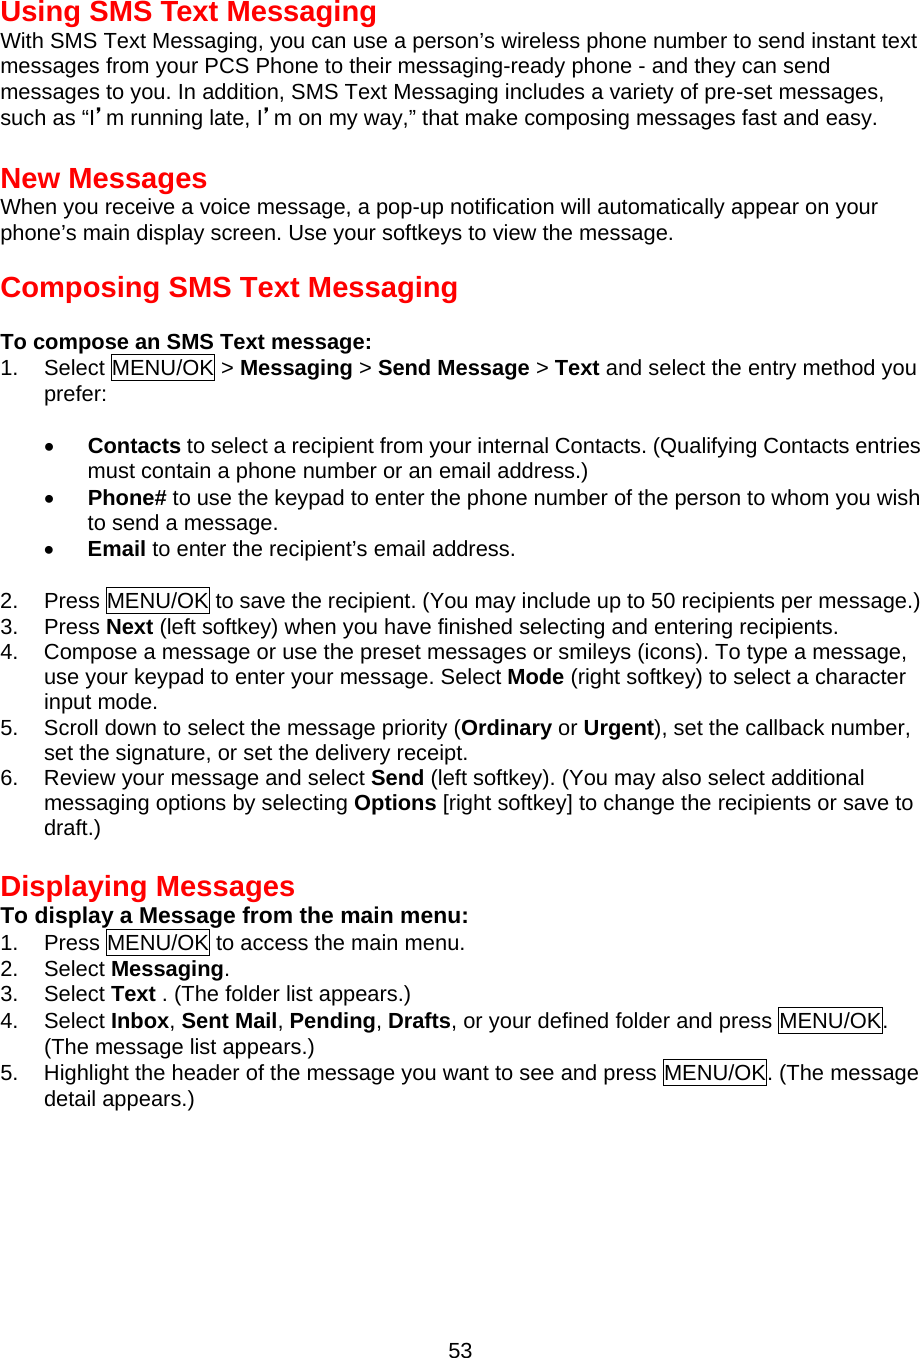 Using SMS Text Messaging With SMS Text Messaging, you can use a person’s wireless phone number to send instant text messages from your PCS Phone to their messaging-ready phone - and they can send messages to you. In addition, SMS Text Messaging includes a variety of pre-set messages, such as “I’m running late, I’m on my way,” that make composing messages fast and easy.  New Messages When you receive a voice message, a pop-up notification will automatically appear on your phone’s main display screen. Use your softkeys to view the message.  Composing SMS Text Messaging  To compose an SMS Text message: 1. Select MENU/OK &gt; Messaging &gt; Send Message &gt; Text and select the entry method you prefer:  •  Contacts to select a recipient from your internal Contacts. (Qualifying Contacts entries must contain a phone number or an email address.) •  Phone# to use the keypad to enter the phone number of the person to whom you wish to send a message. •  Email to enter the recipient’s email address.  2. Press MENU/OK to save the recipient. (You may include up to 50 recipients per message.) 3. Press Next (left softkey) when you have finished selecting and entering recipients. 4.  Compose a message or use the preset messages or smileys (icons). To type a message, use your keypad to enter your message. Select Mode (right softkey) to select a character input mode. 5.  Scroll down to select the message priority (Ordinary or Urgent), set the callback number, set the signature, or set the delivery receipt. 6.  Review your message and select Send (left softkey). (You may also select additional messaging options by selecting Options [right softkey] to change the recipients or save to draft.)  Displaying Messages To display a Message from the main menu: 1. Press MENU/OK to access the main menu. 2. Select Messaging. 3. Select Text . (The folder list appears.) 4. Select Inbox, Sent Mail, Pending, Drafts, or your defined folder and press MENU/OK. (The message list appears.) 5.  Highlight the header of the message you want to see and press MENU/OK. (The message detail appears.)   53